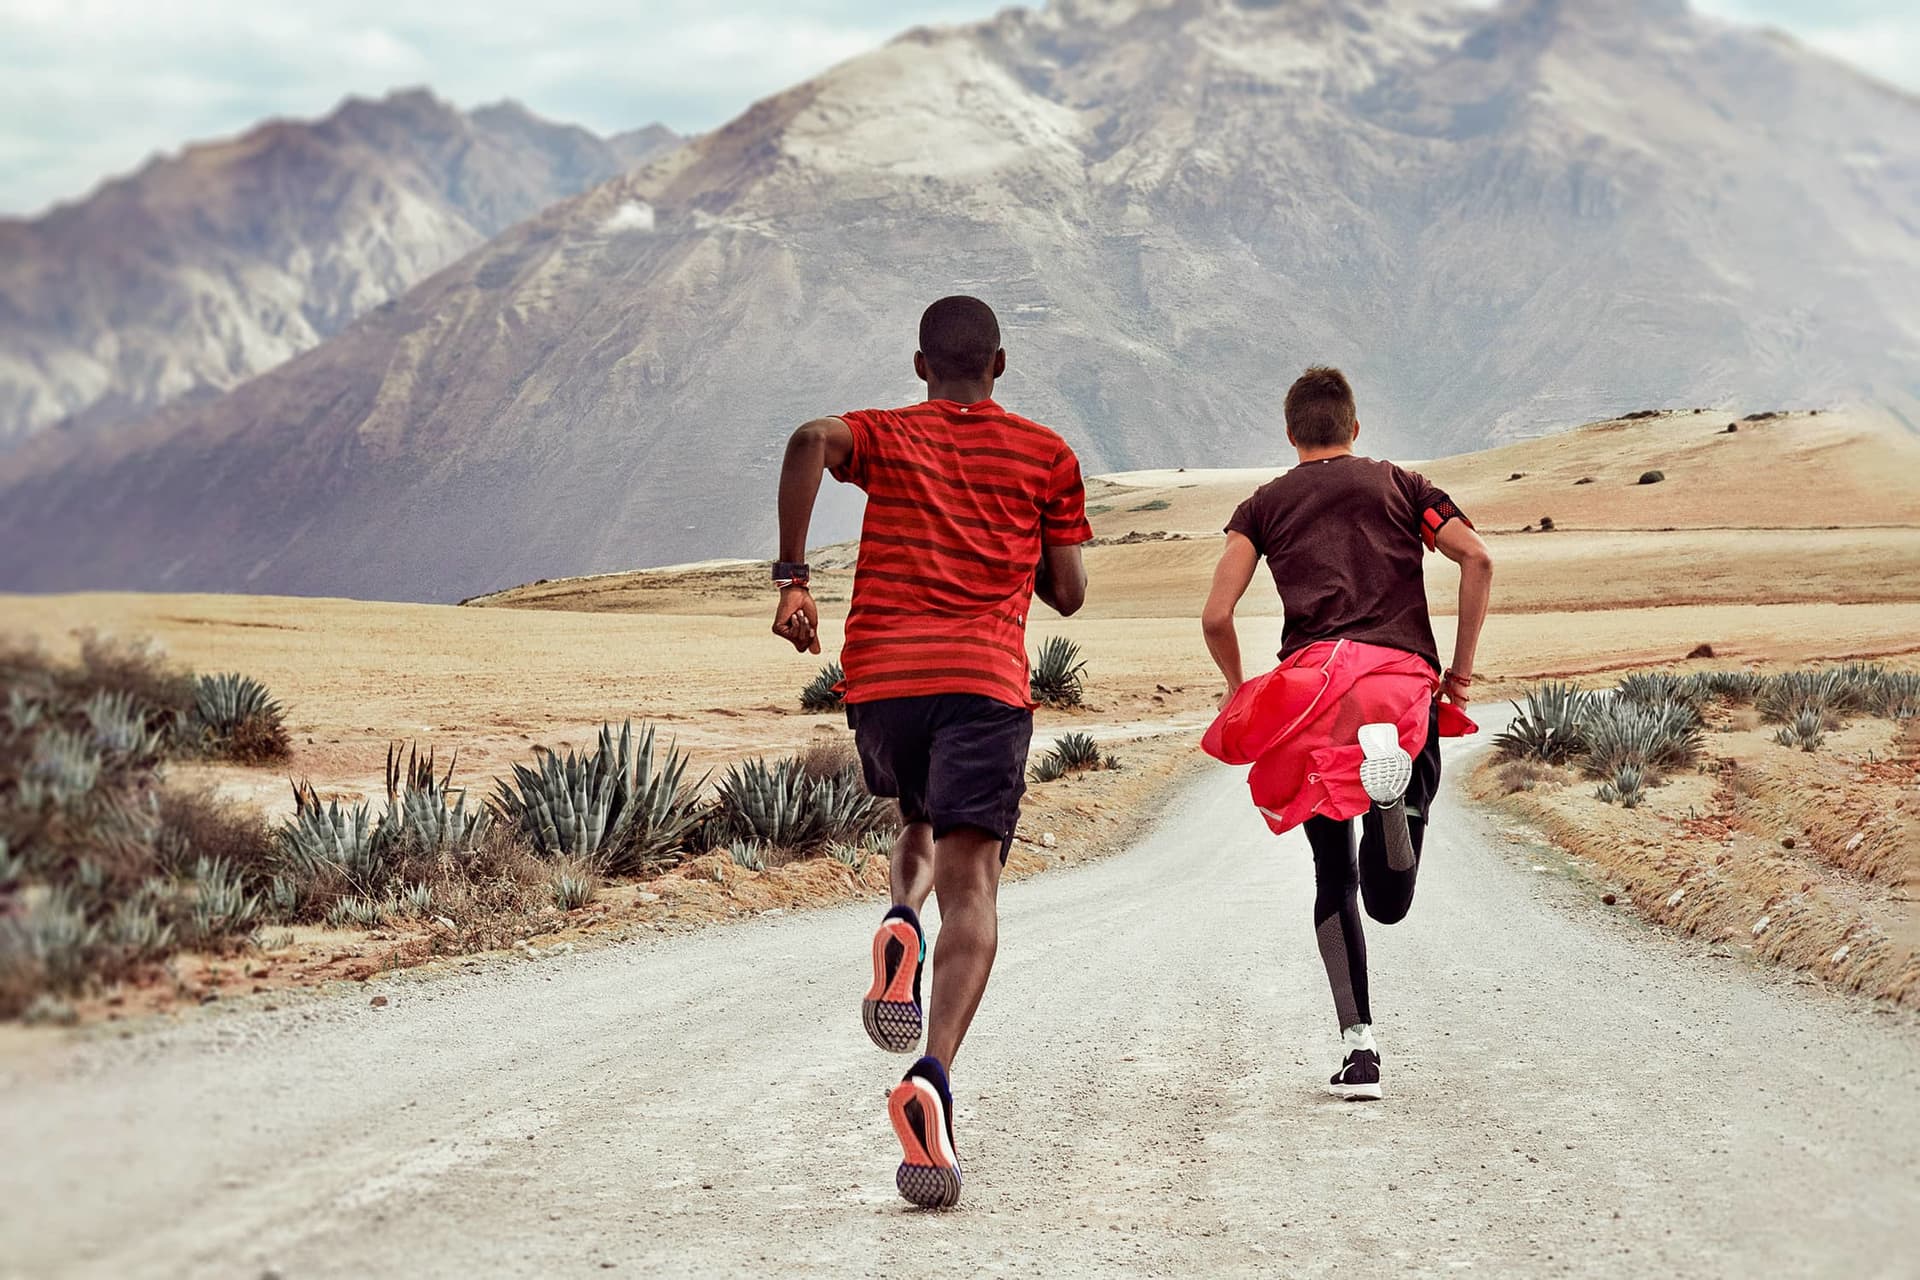 How to Increase Your Running Mileage Without Getting Injured, According to Experts